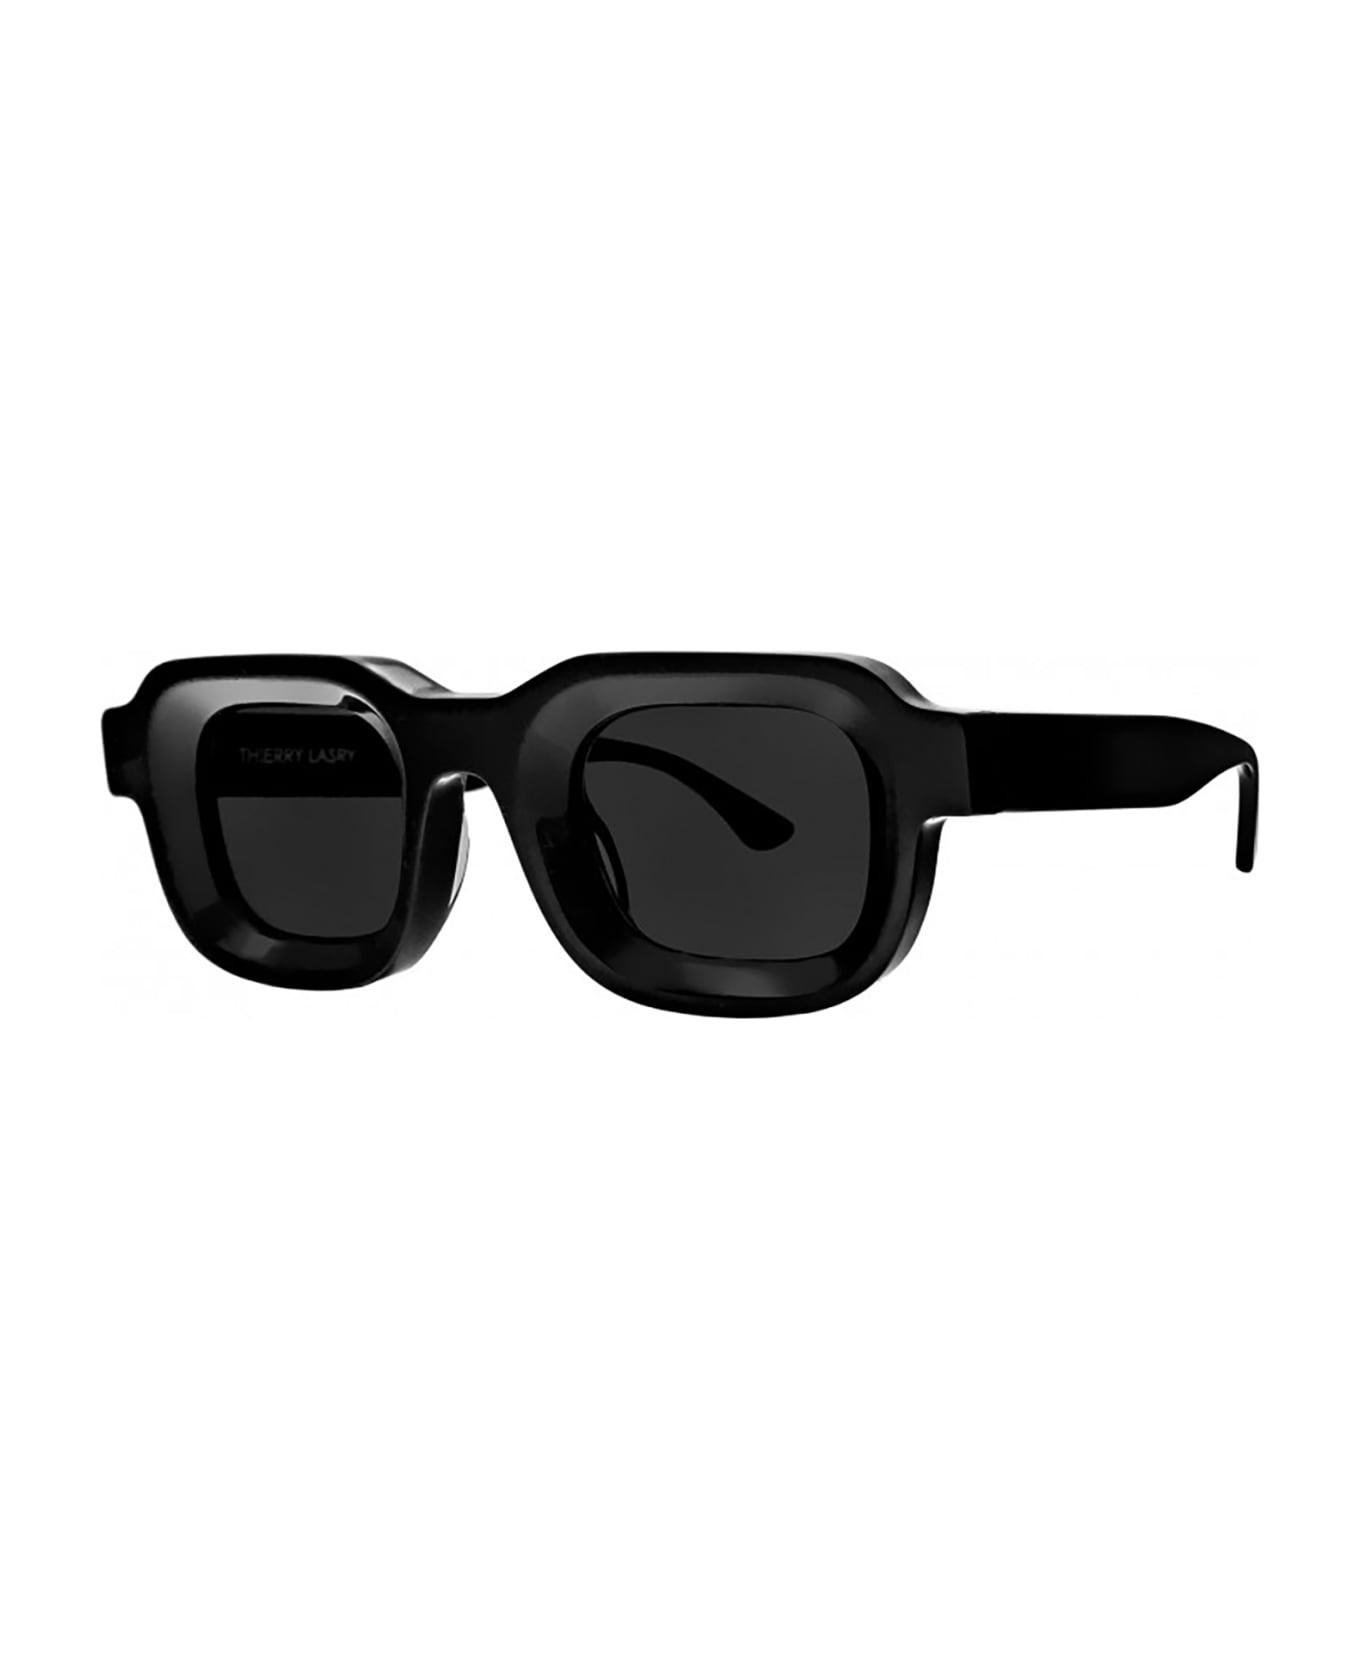 Thierry Lasry NARCOTY GG0900S Sunglasses